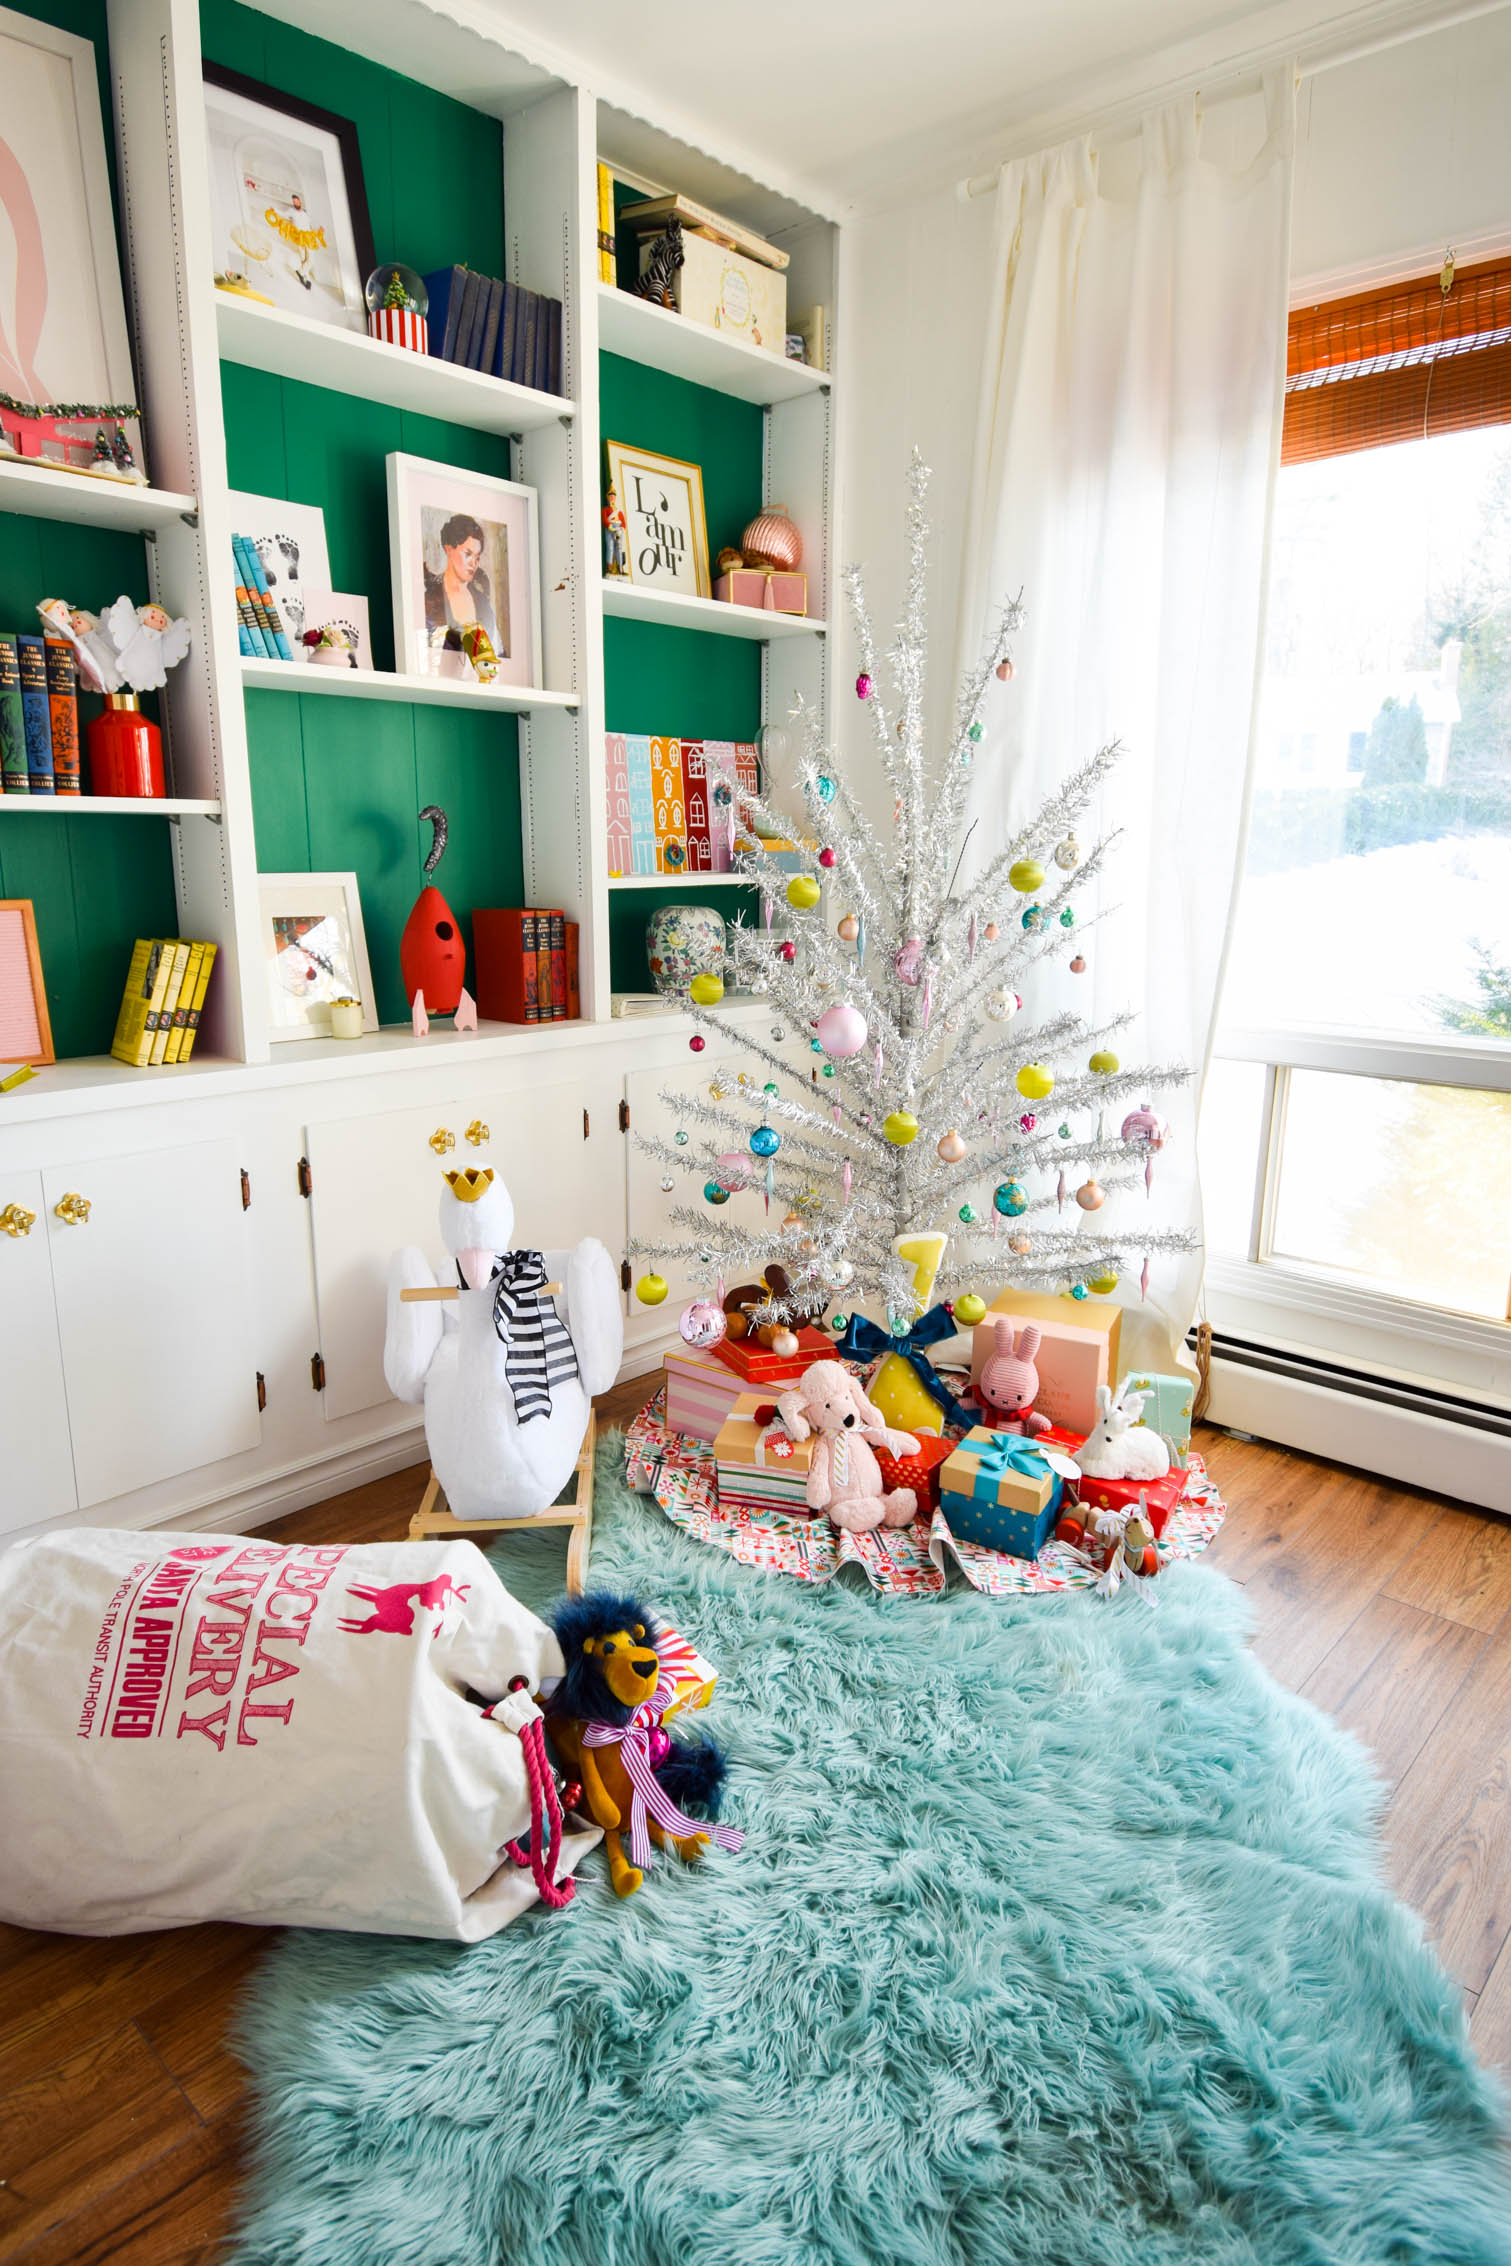 Colourful Christmas decor ideas across a variety of different textures and materials, make for a cozy and playful home this year.